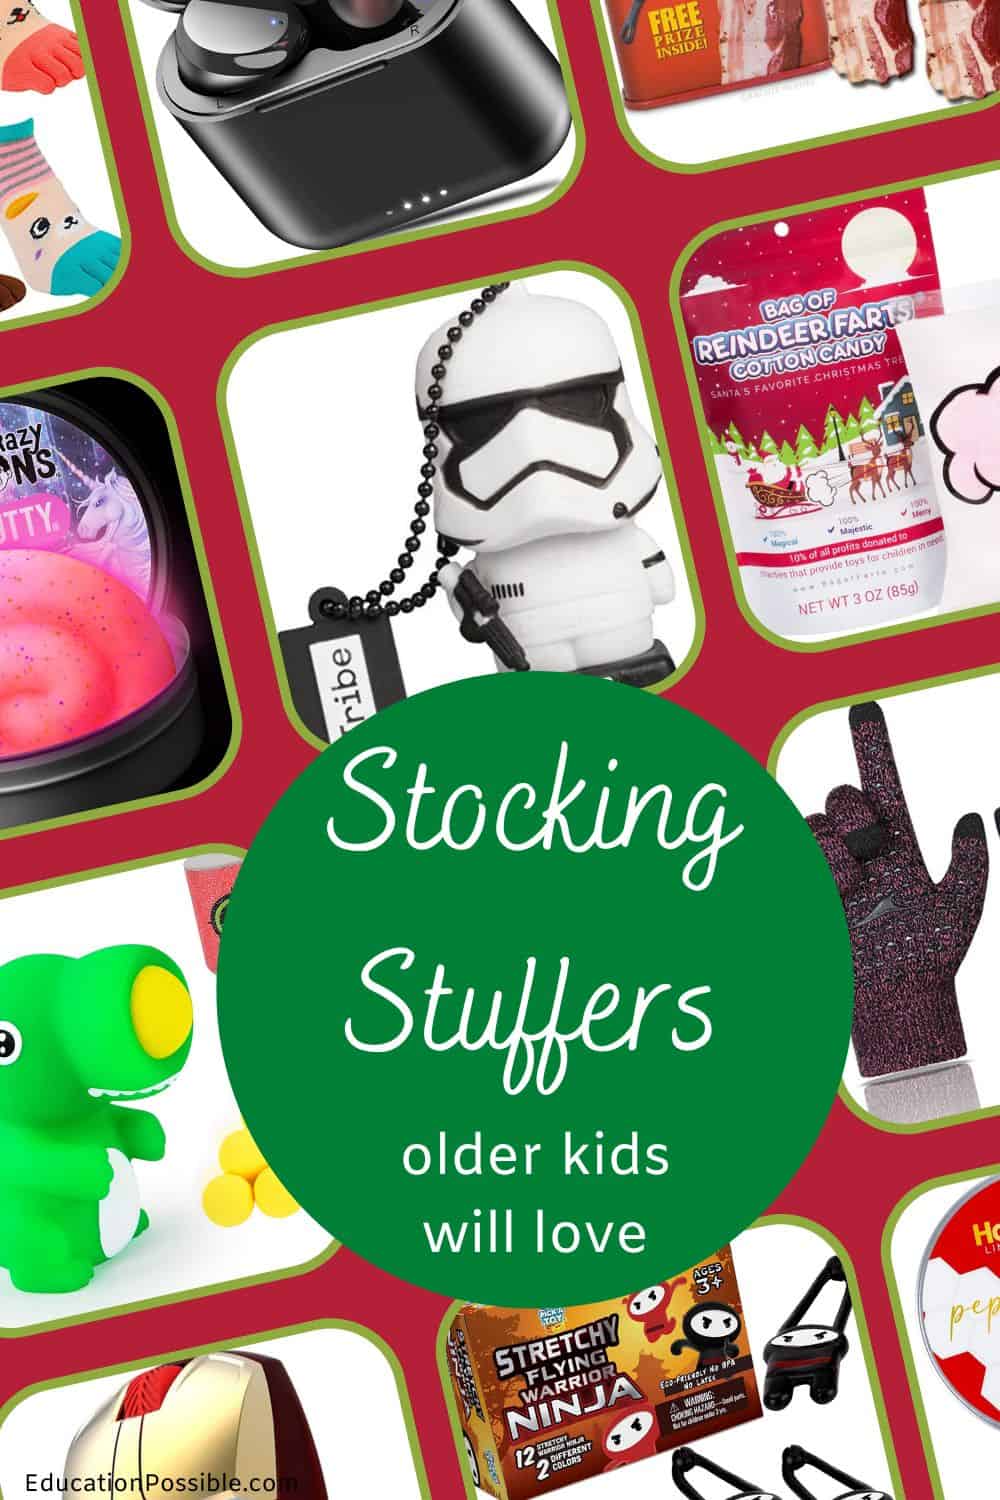 Image collage of stocking stuffer items for tweens and teens.